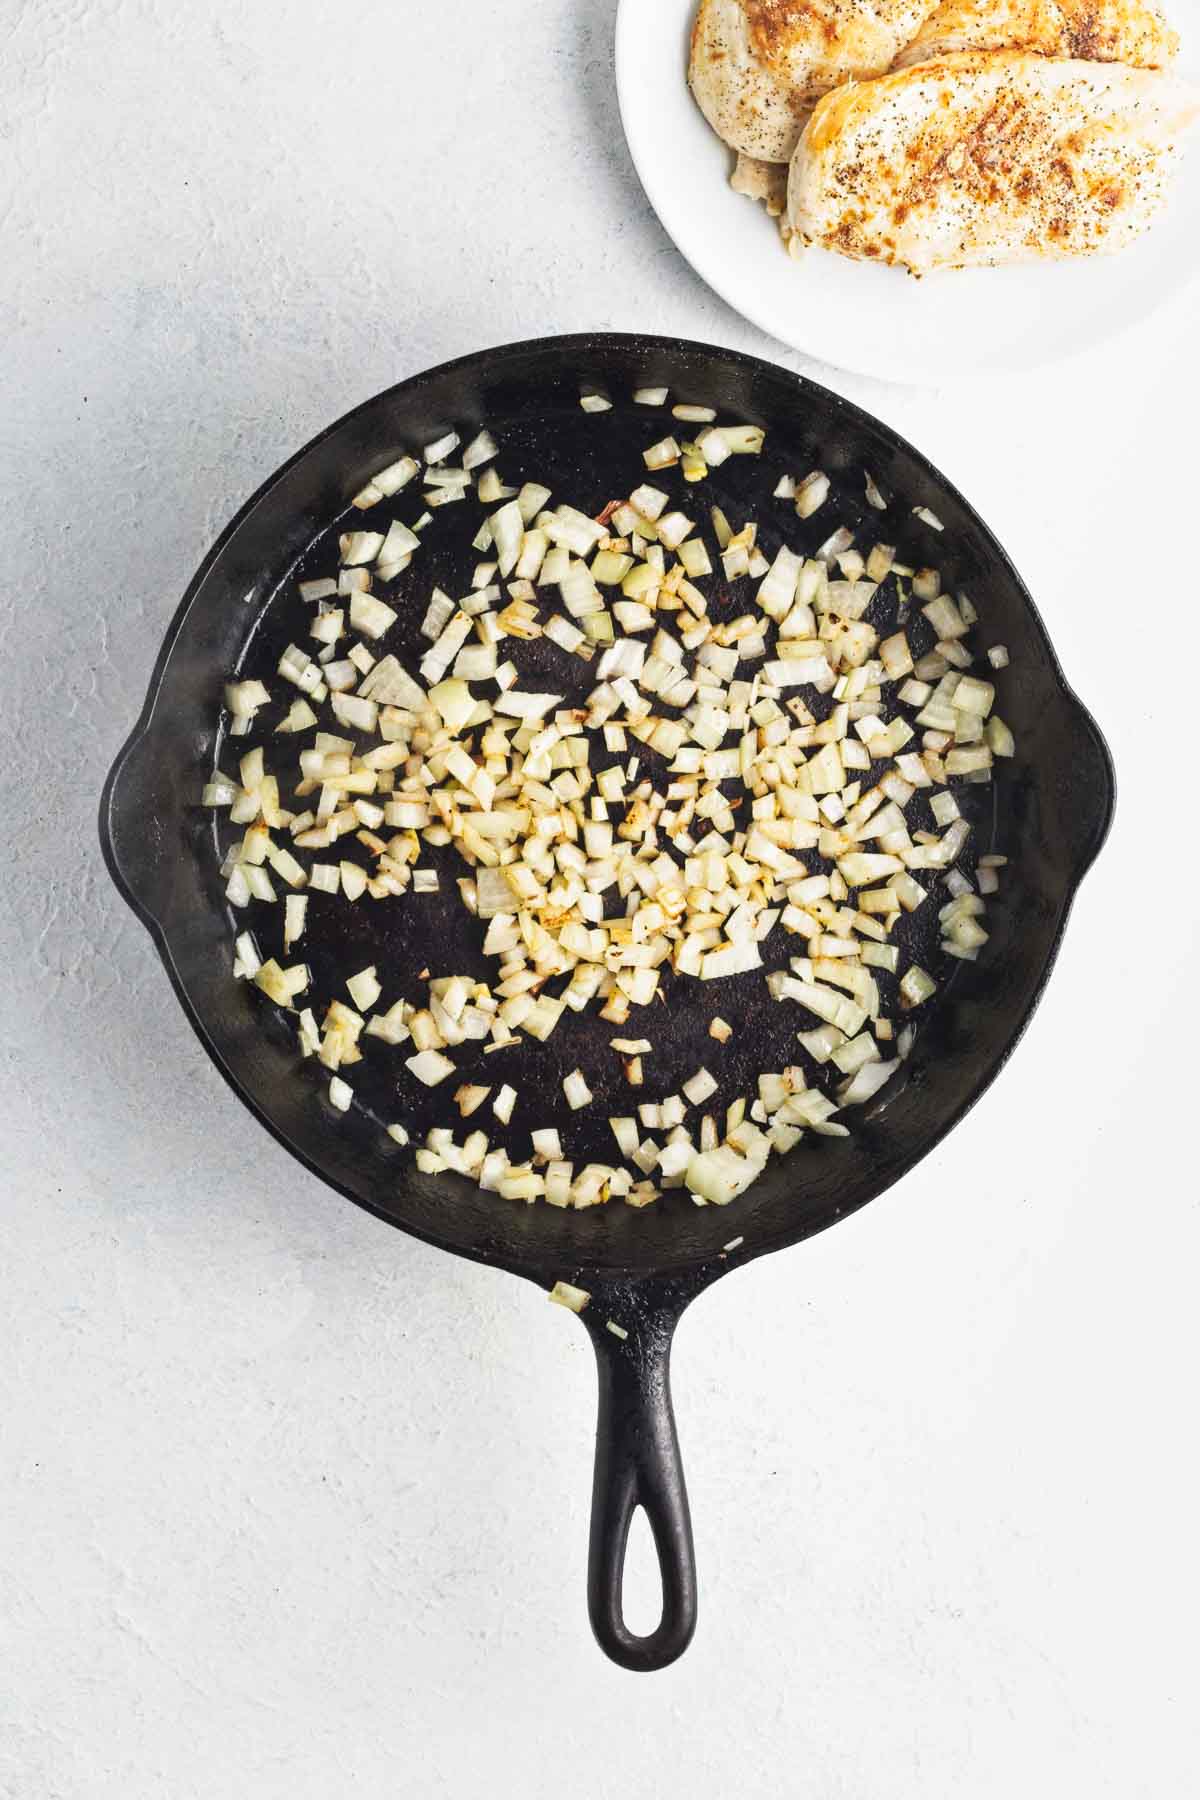 Diced onions sautéing in a skillet